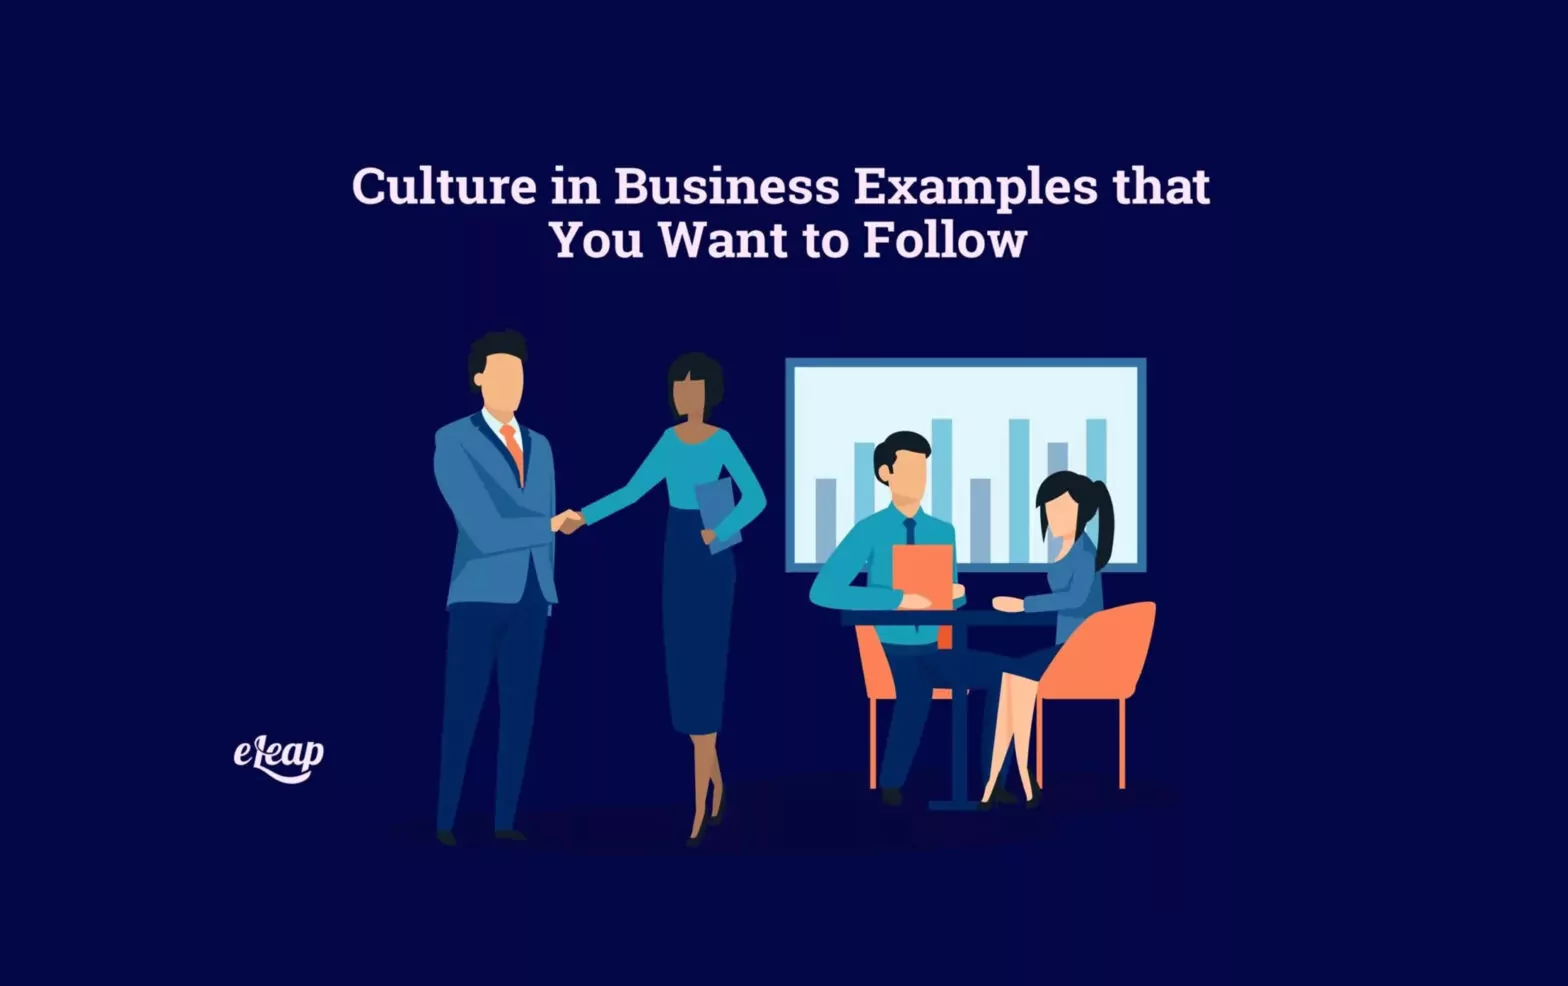 Culture in Business Examples that You Want to Follow